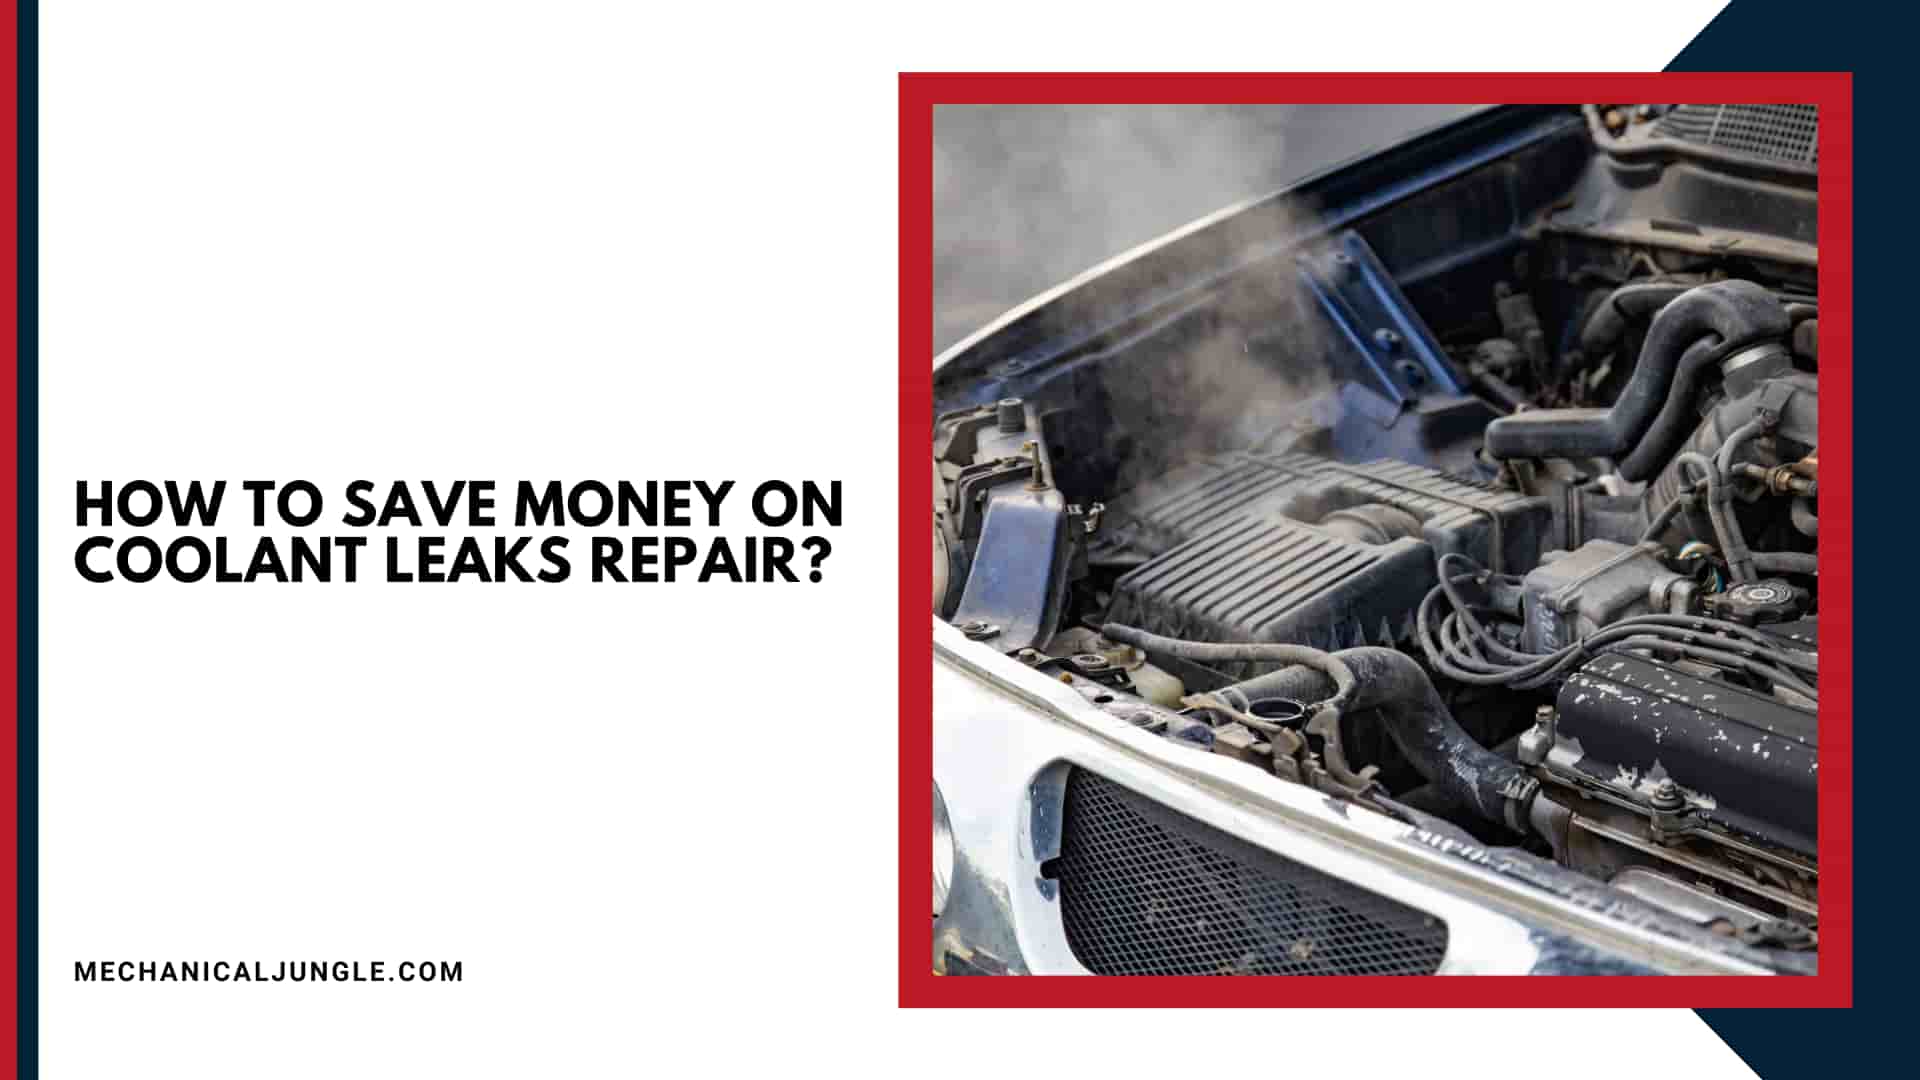 How to Save Money on Coolant Leaks Repair?